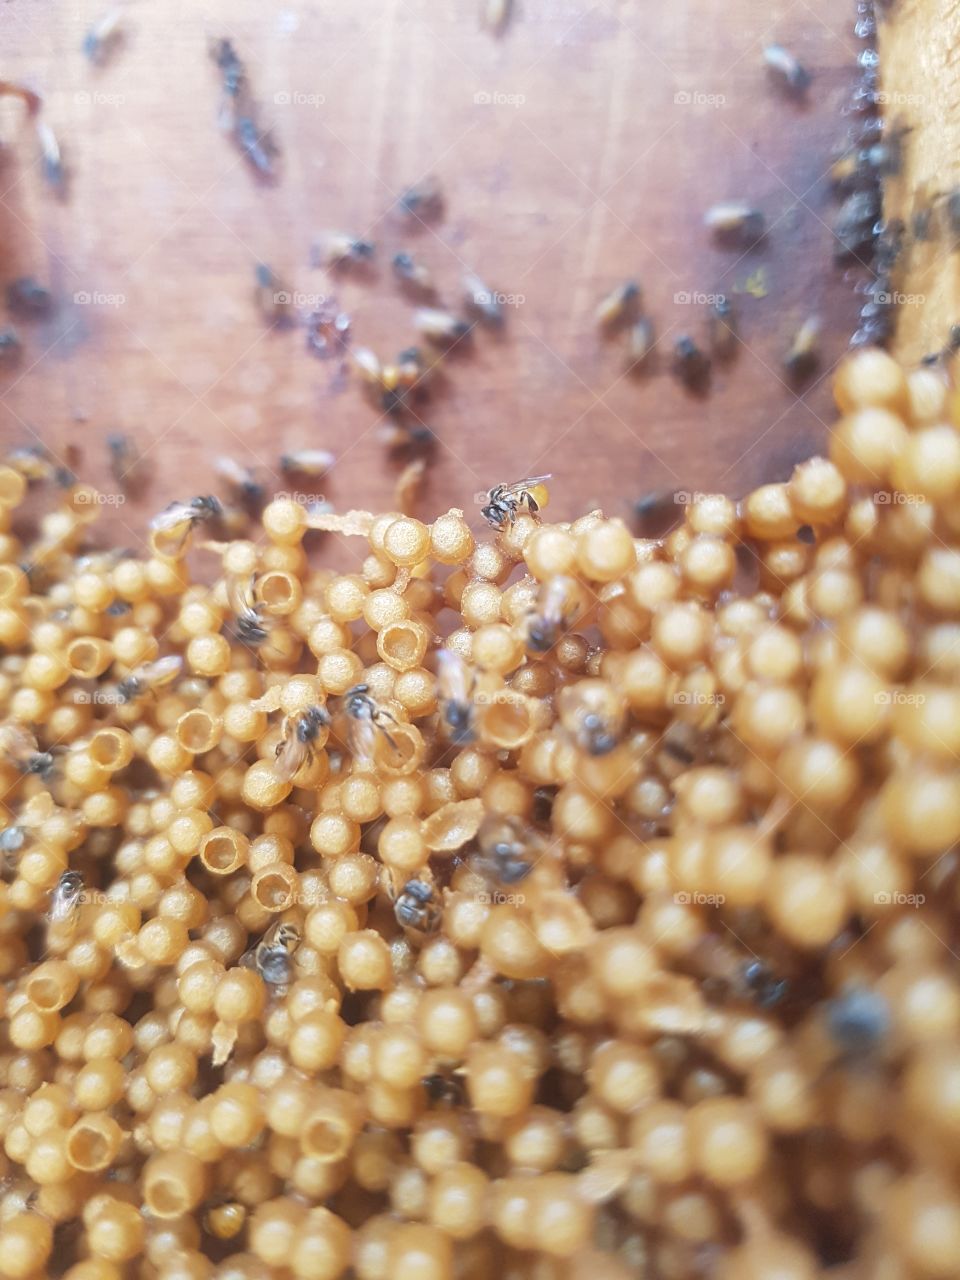 inside beehive with bee and eggs, larva